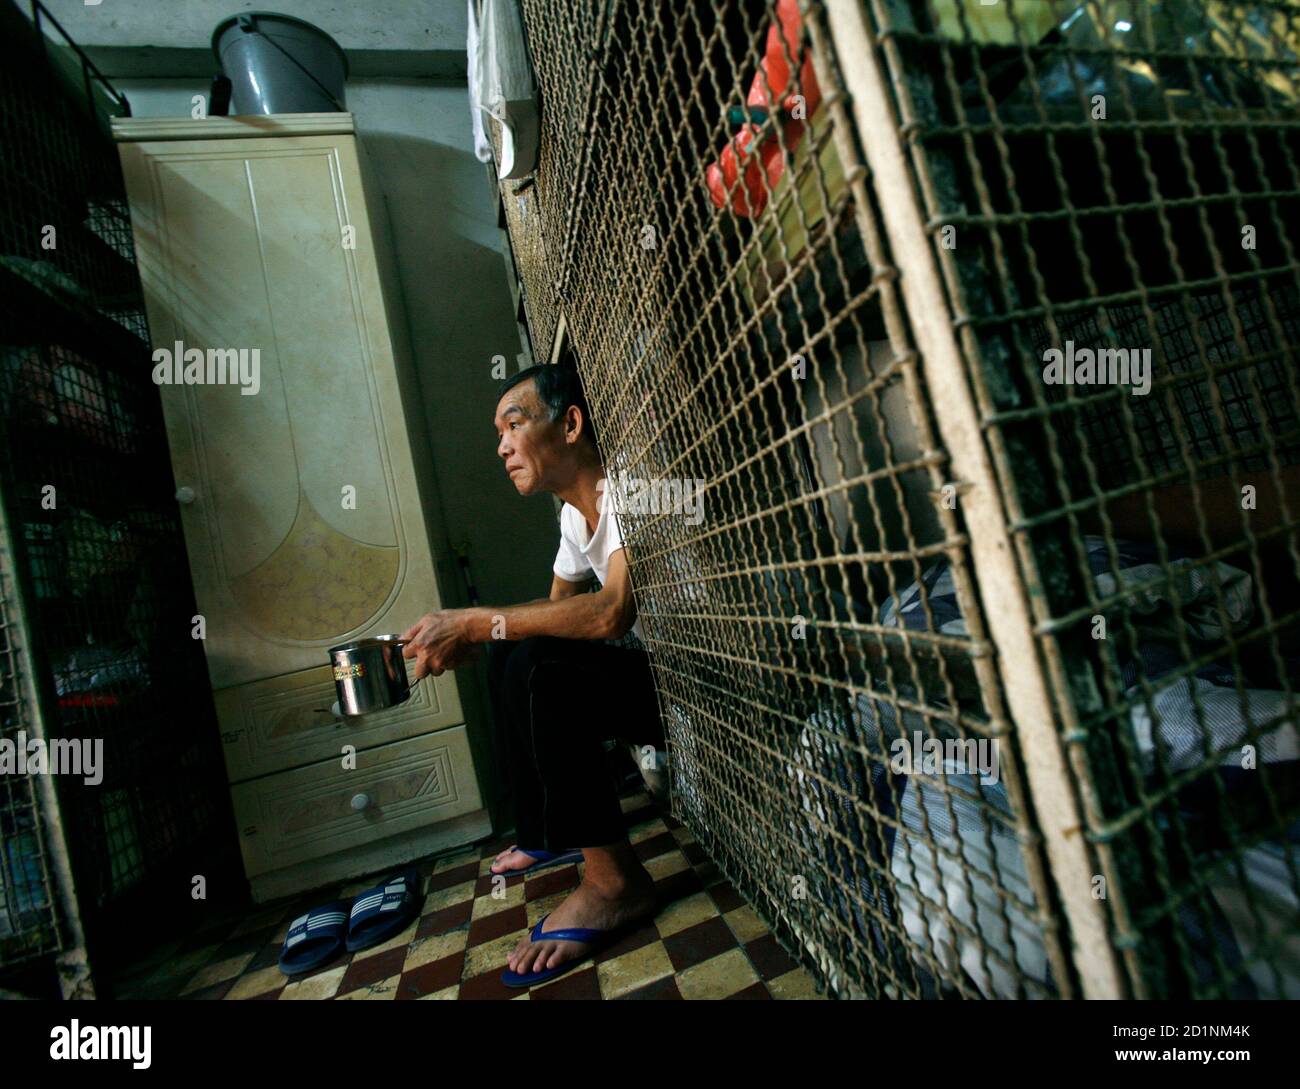 Kong Siu-kau, 63, a cage home resident for several years relying on government pension, sits in his cage bed in Hong Kong March 20, 2009. The monthly rent of a caged-bed, the lowest standard for a shelter in Hong Kong besides sleeping on the street, costs $150. Hong Kong's unemployment rate has risen to five percent, the highest level since June 2006, government said on Tuesday. Labour Secretary Matthew Cheung said the worsening job market was noticeable and he expects unemployment to rise further, government radio reported.   REUTERS/Bobby Yip   (CHINA BUSINESS POLITICS) Stock Photo